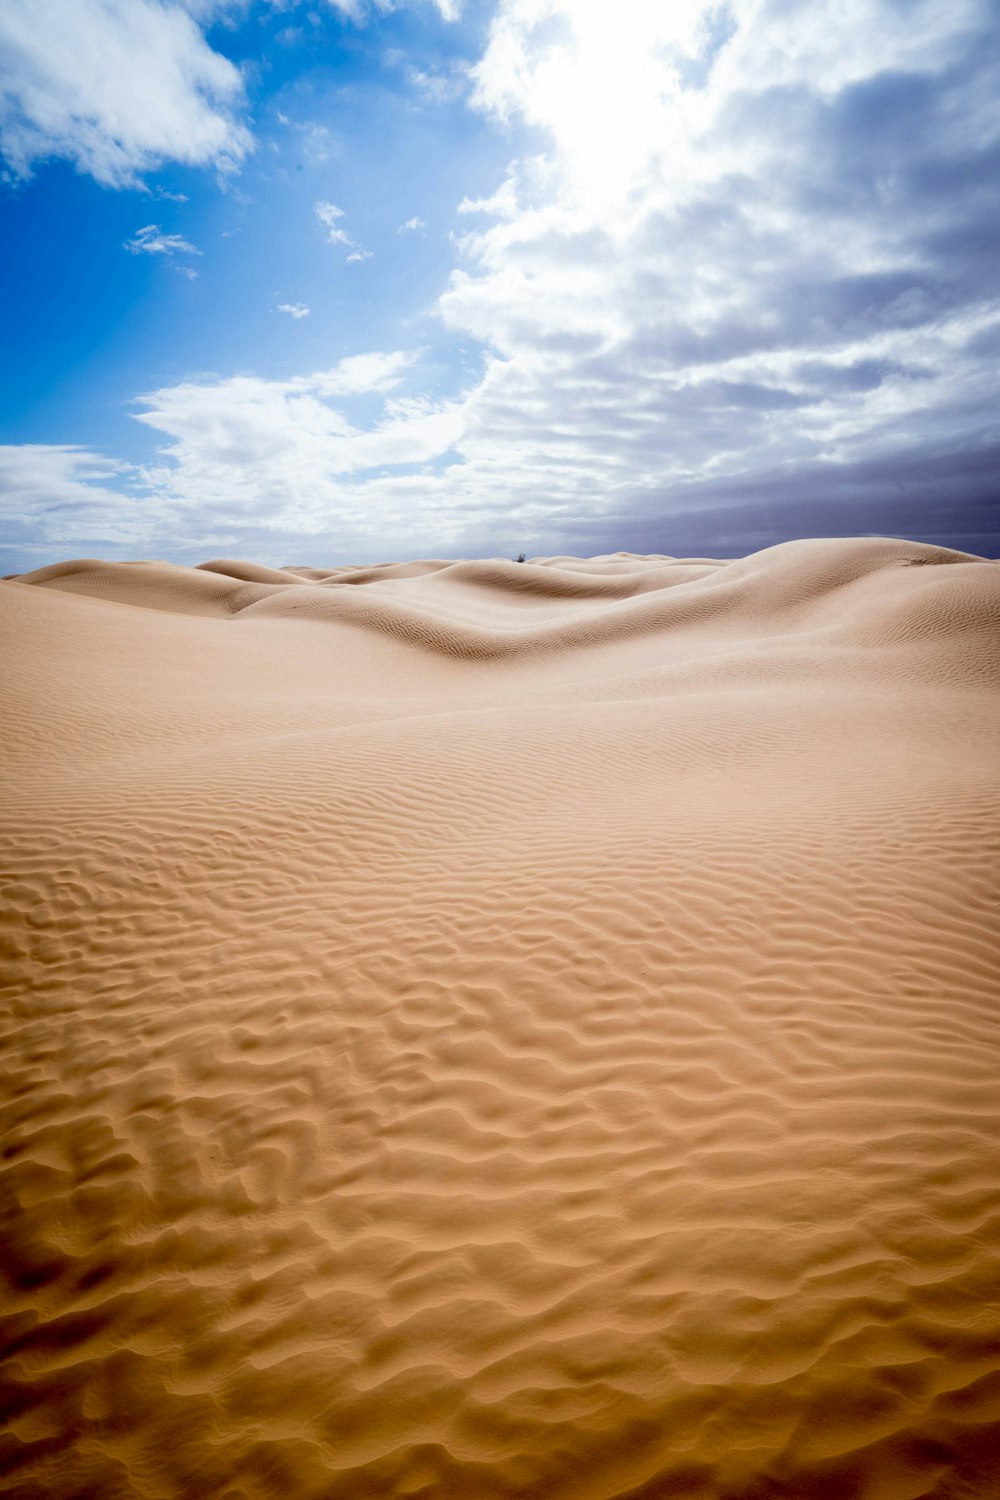 desert under blue sky and white clouds during daytime